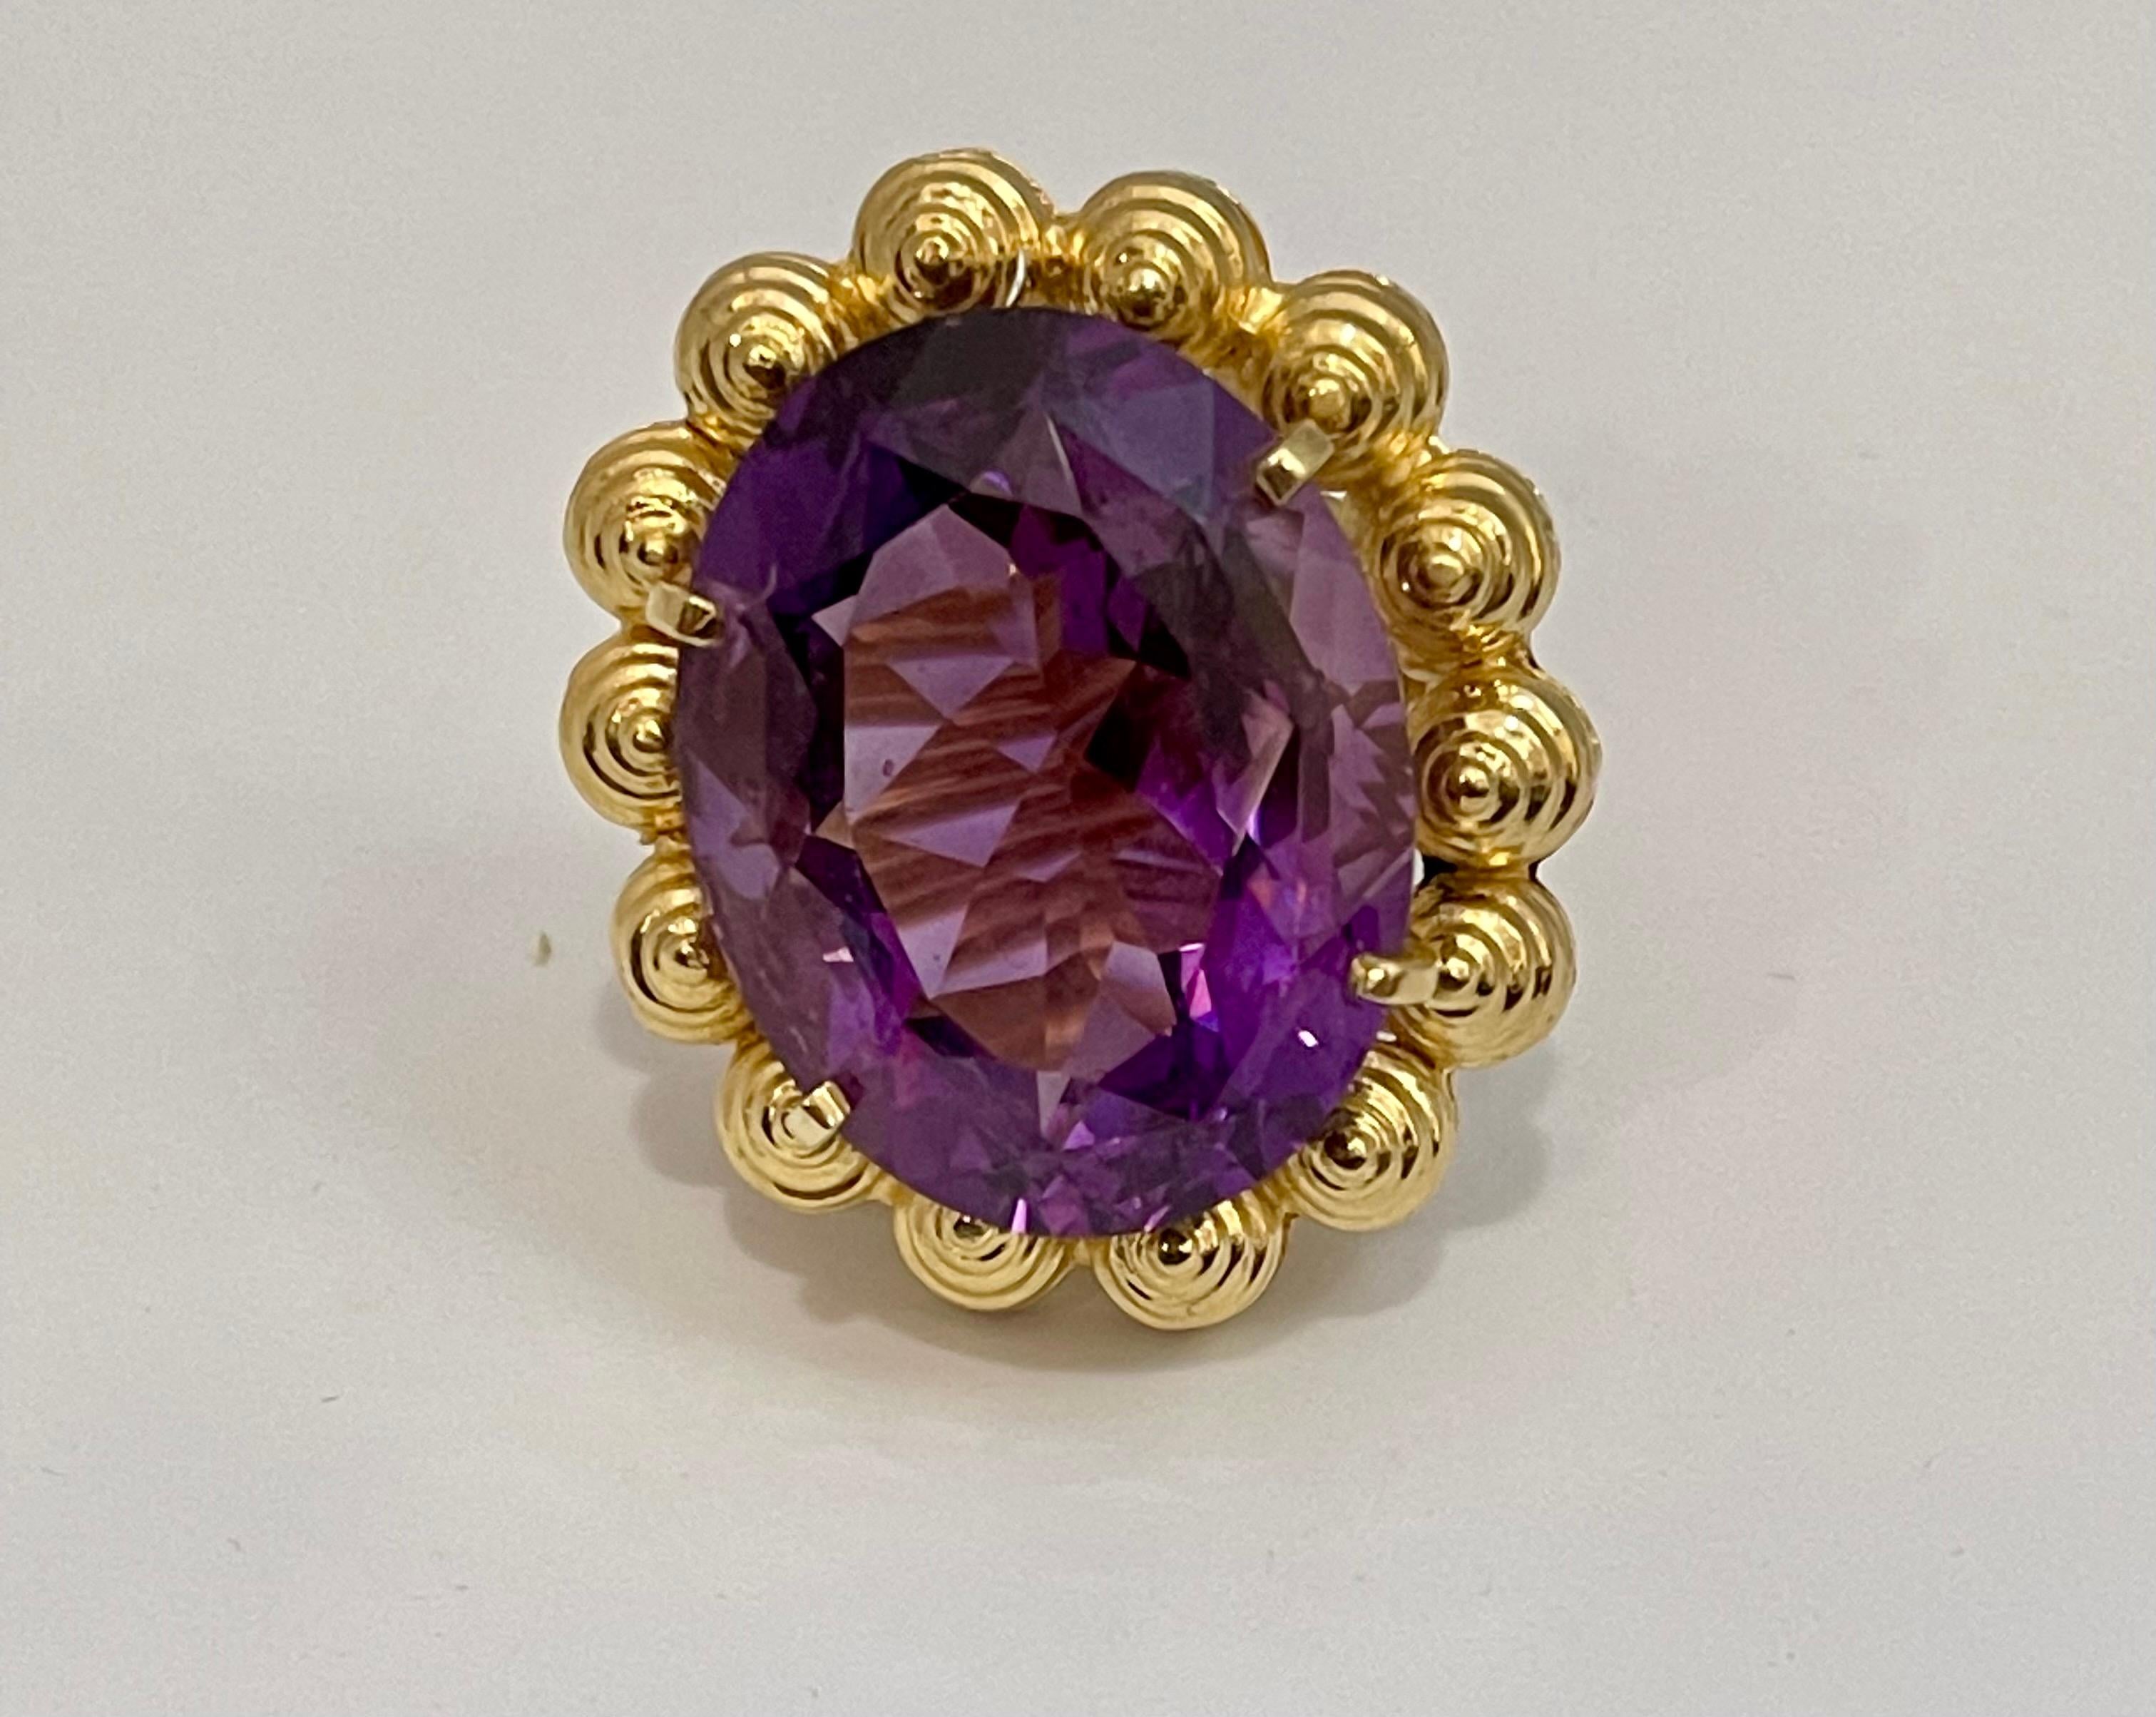 50 Carat Amethyst Cocktail Ring in Solid 18 Karat Yellow Gold 29 Grams For Sale 5